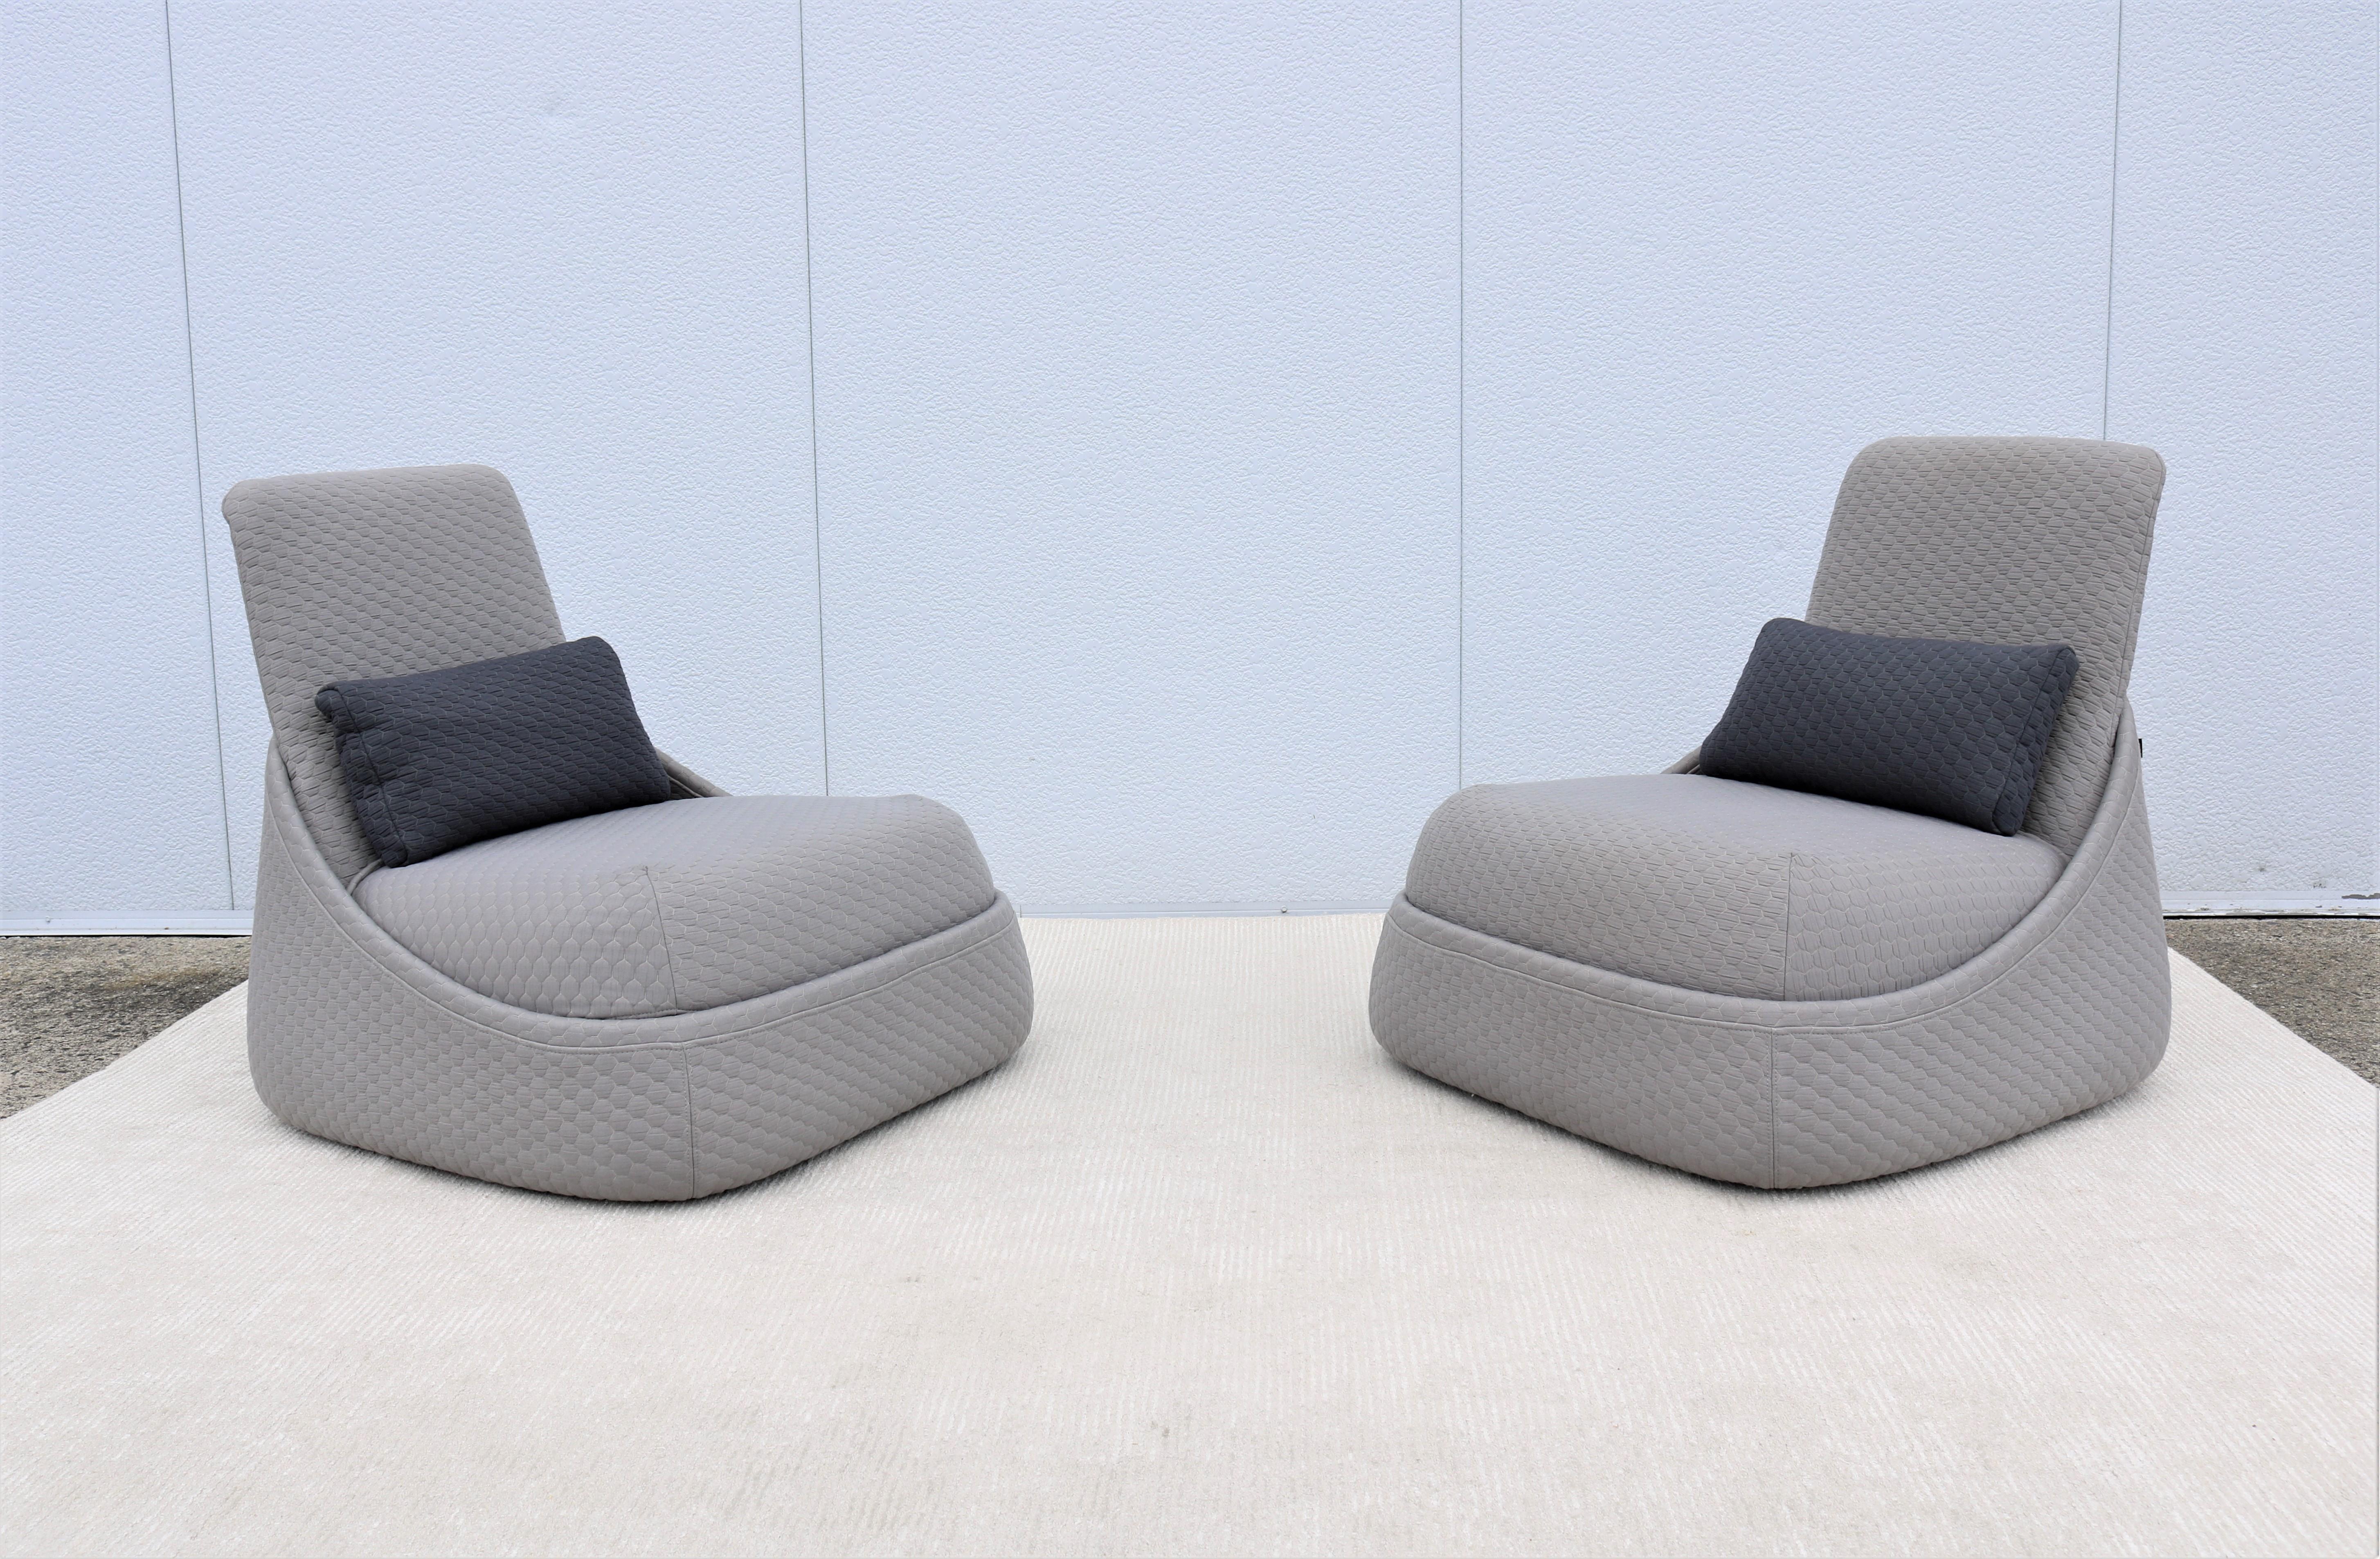 American Modern Patricia Urquiola for Coalesse Hosu Lounge Chairs with Ottoman, a Pair For Sale